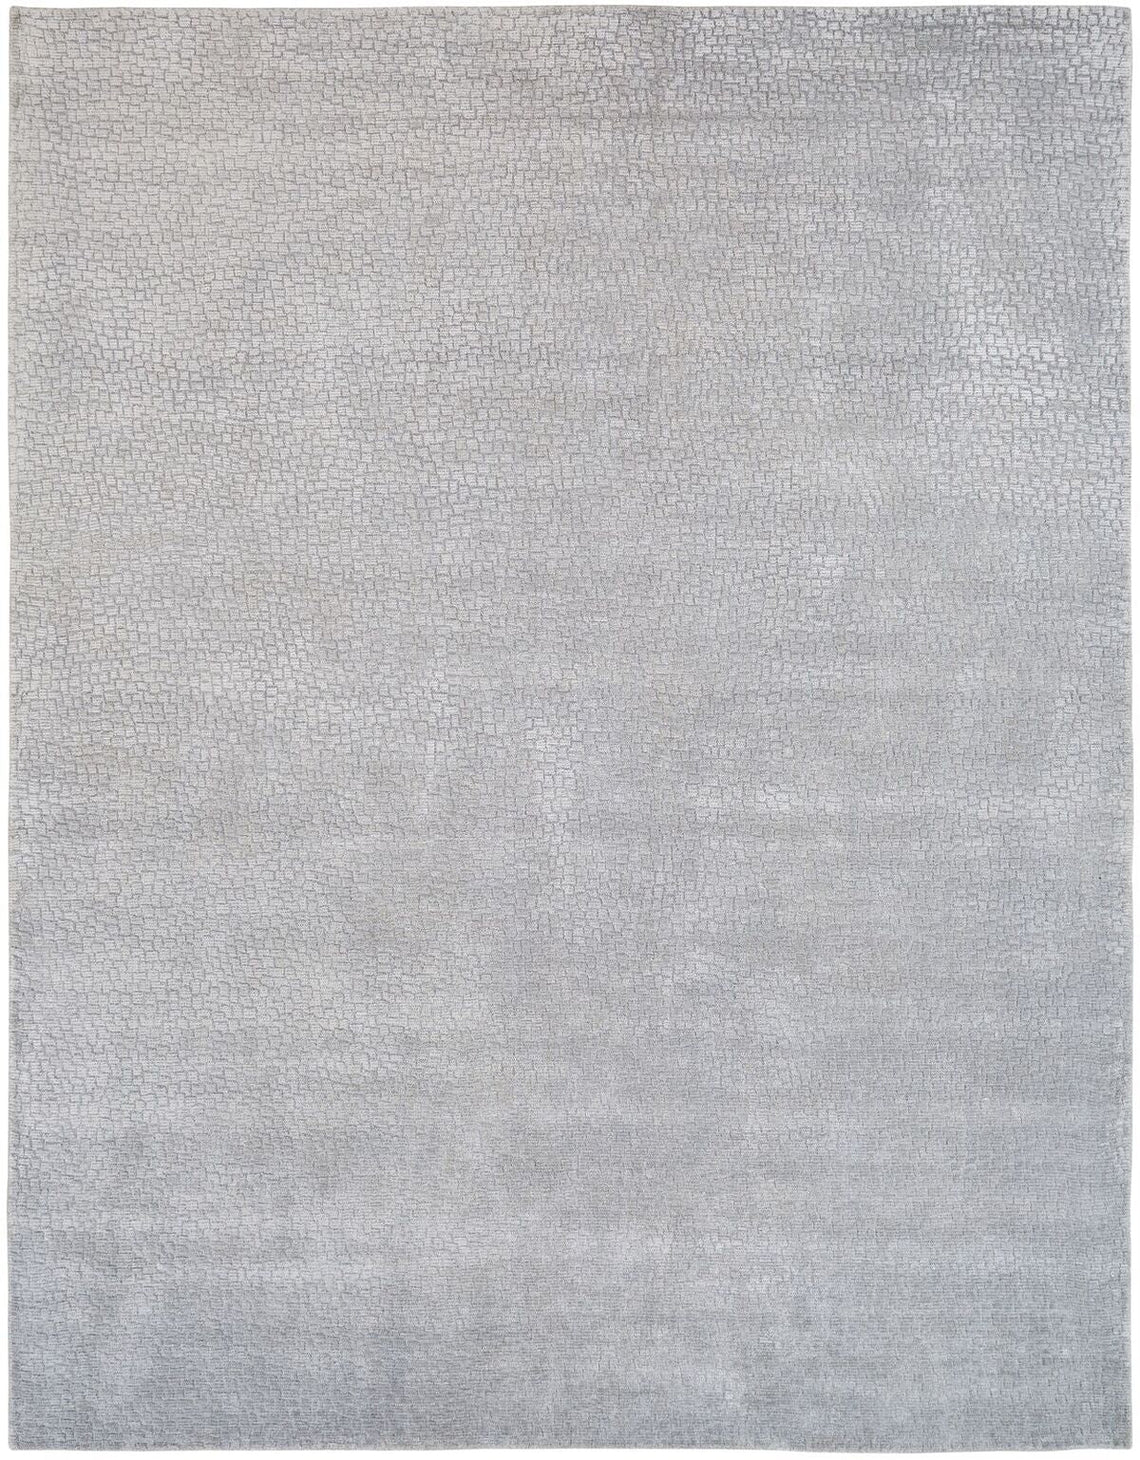 Renzo Mineral Grey 5 ft. 6 in. x 8 ft. 6 in. Area Rug